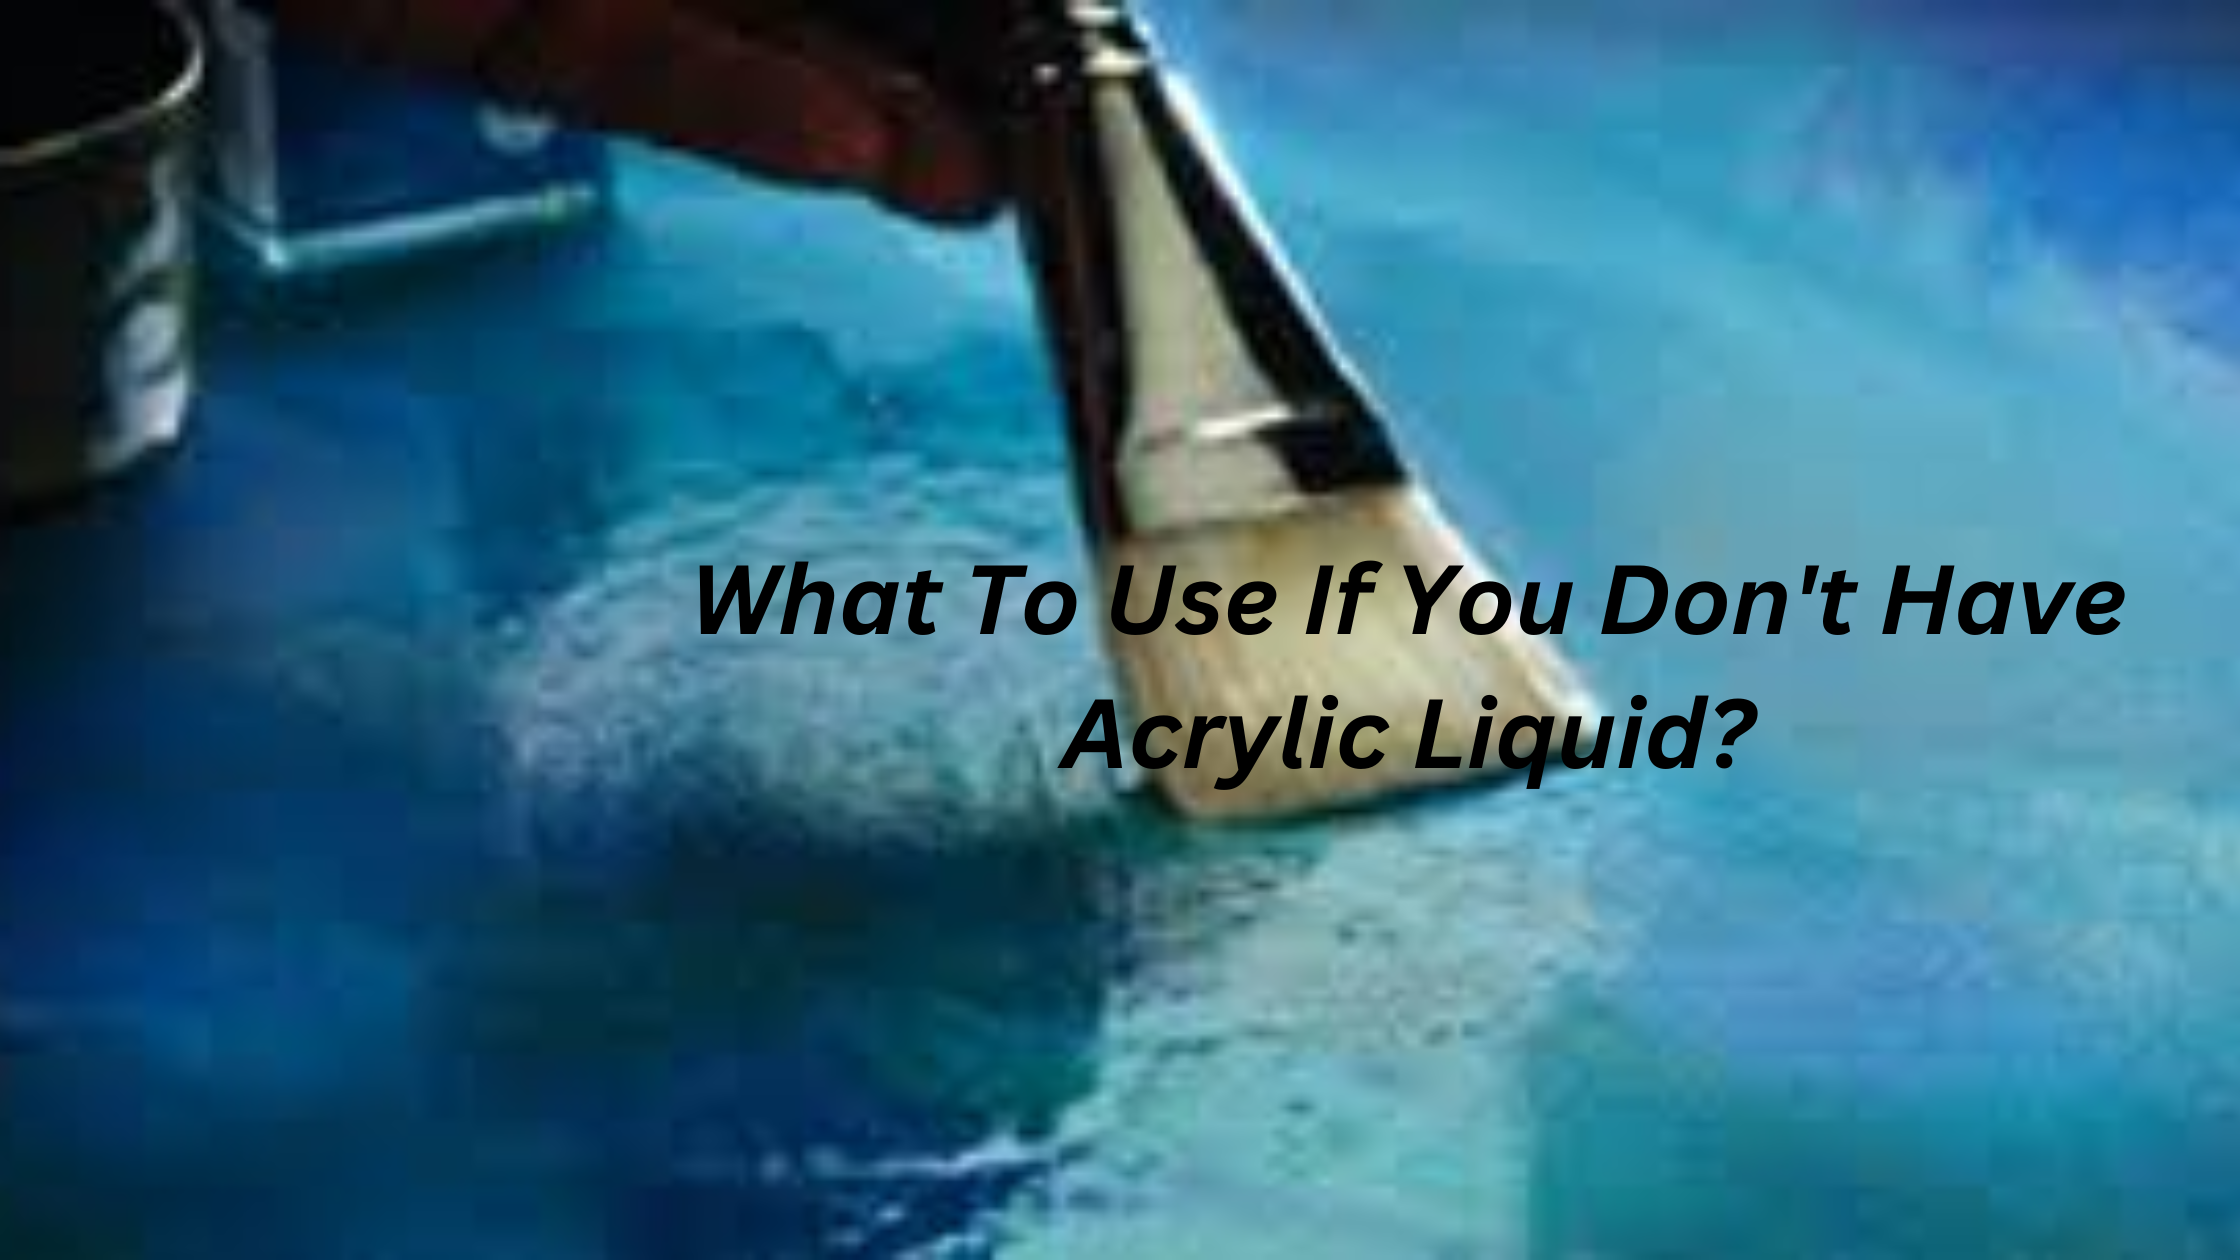 What To Use If You Don't Have Acrylic Liquid?